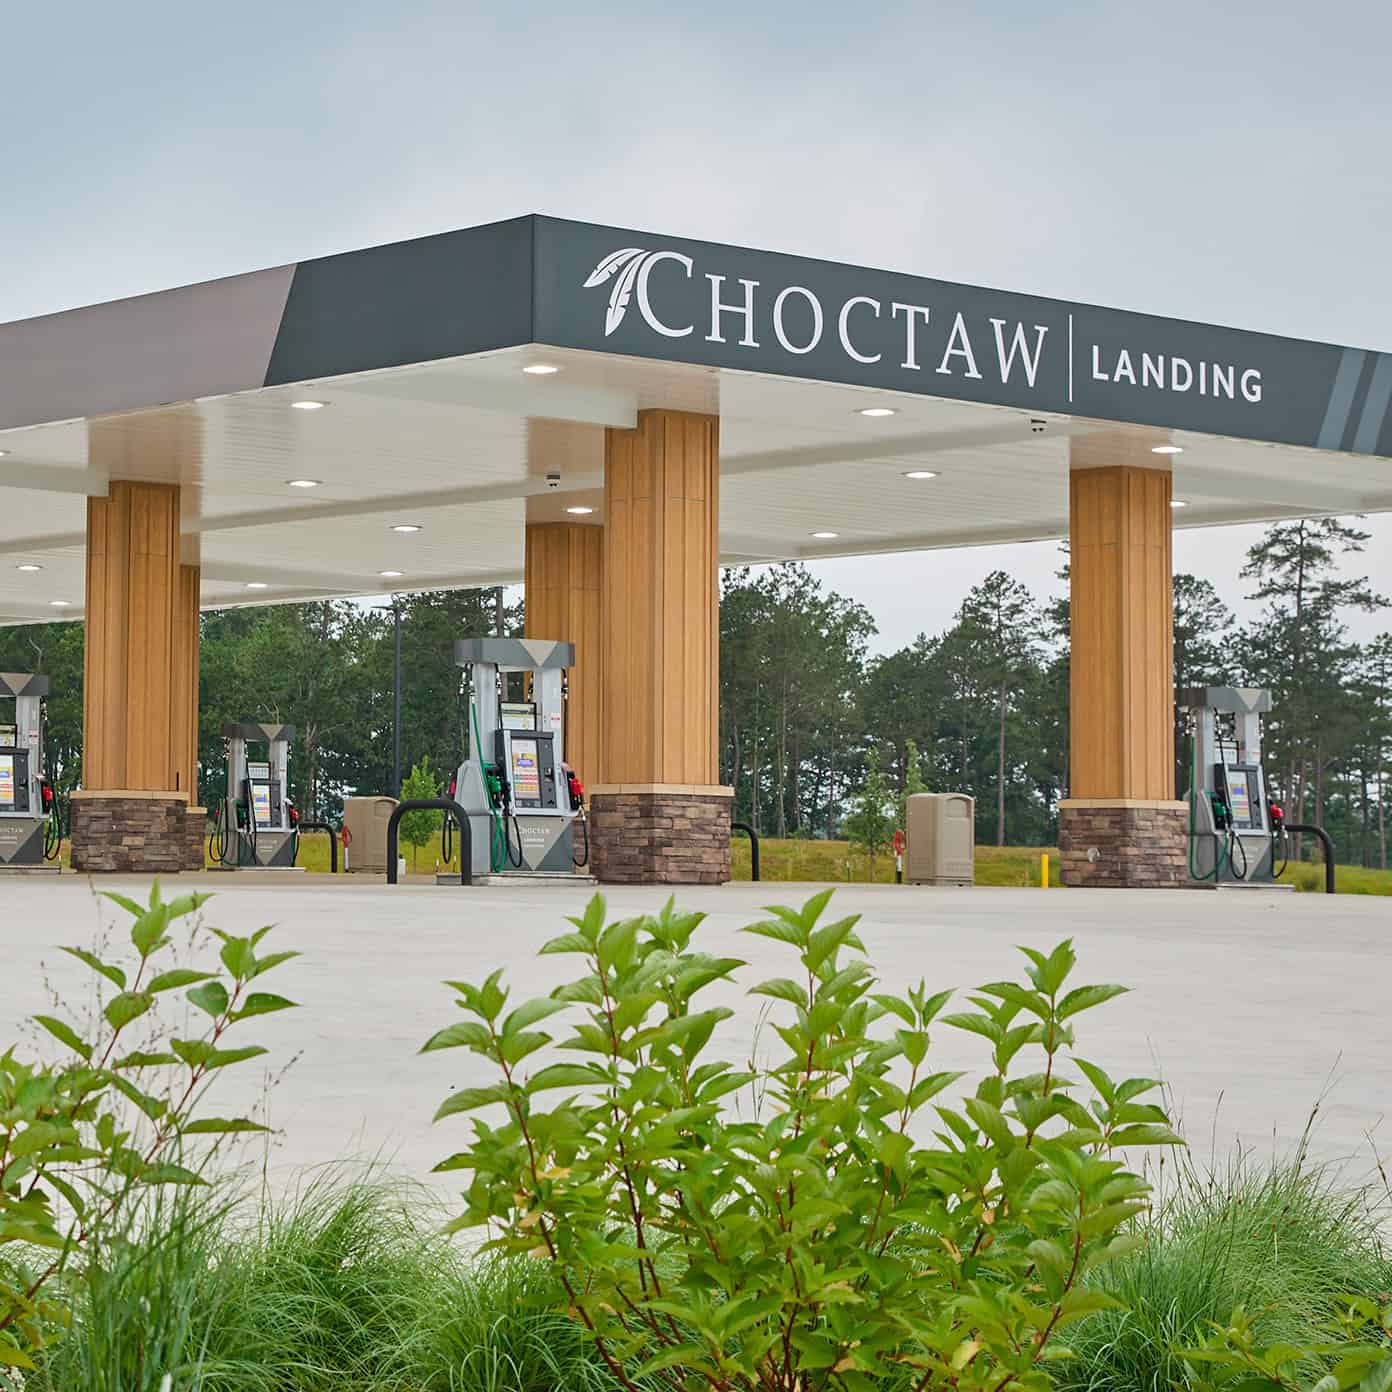 A black gas nozzle with the Choctaw "C" logo is being set in its place at a gas station.